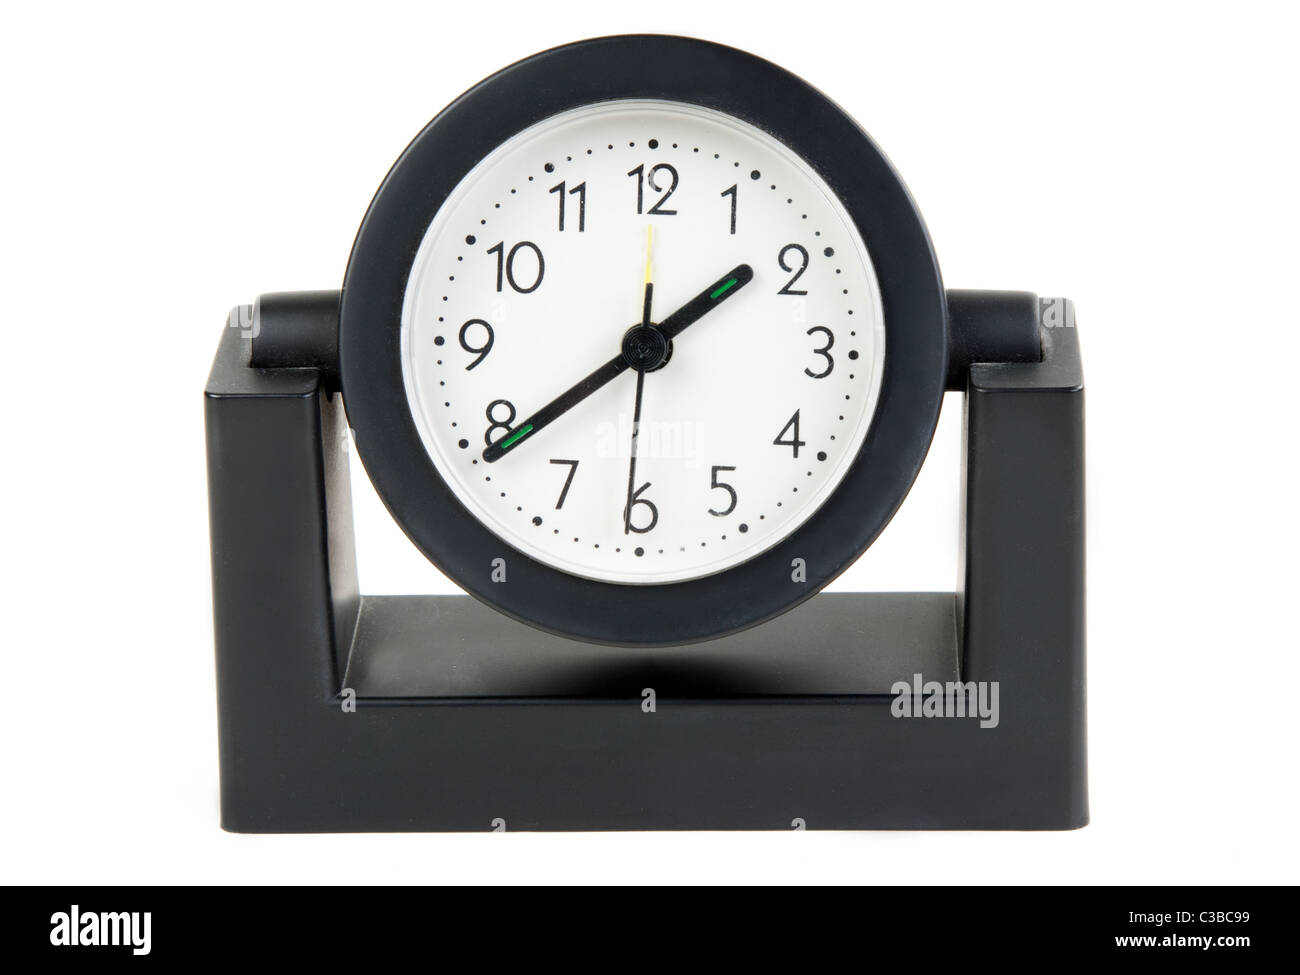 Desktops mechanical clock in a black plastic casing with a white background Stock Photo